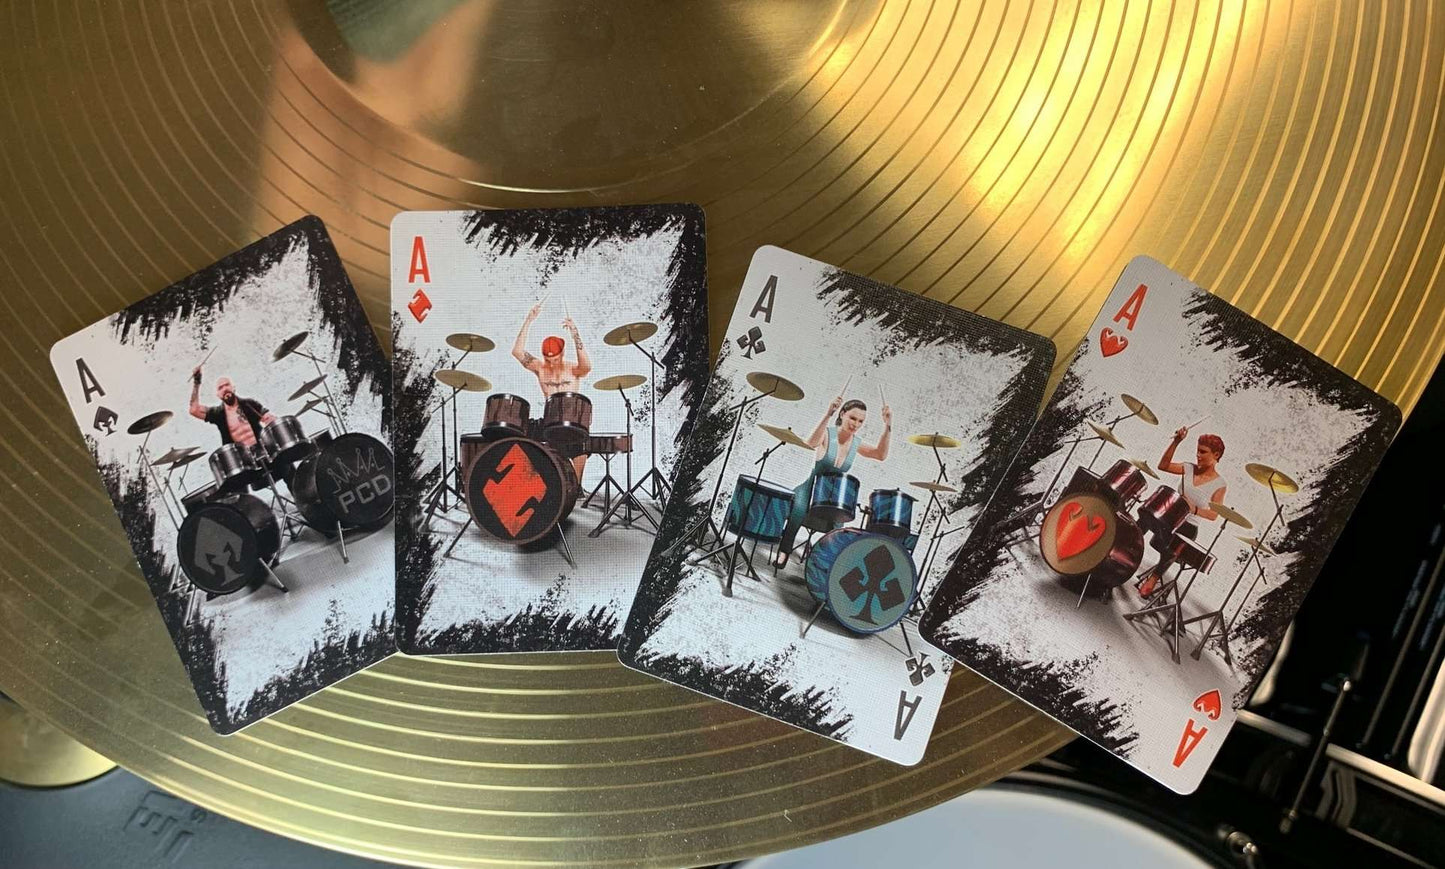 PlayingCardDecks.com-Rock & Roll Bicycle Playing Cards